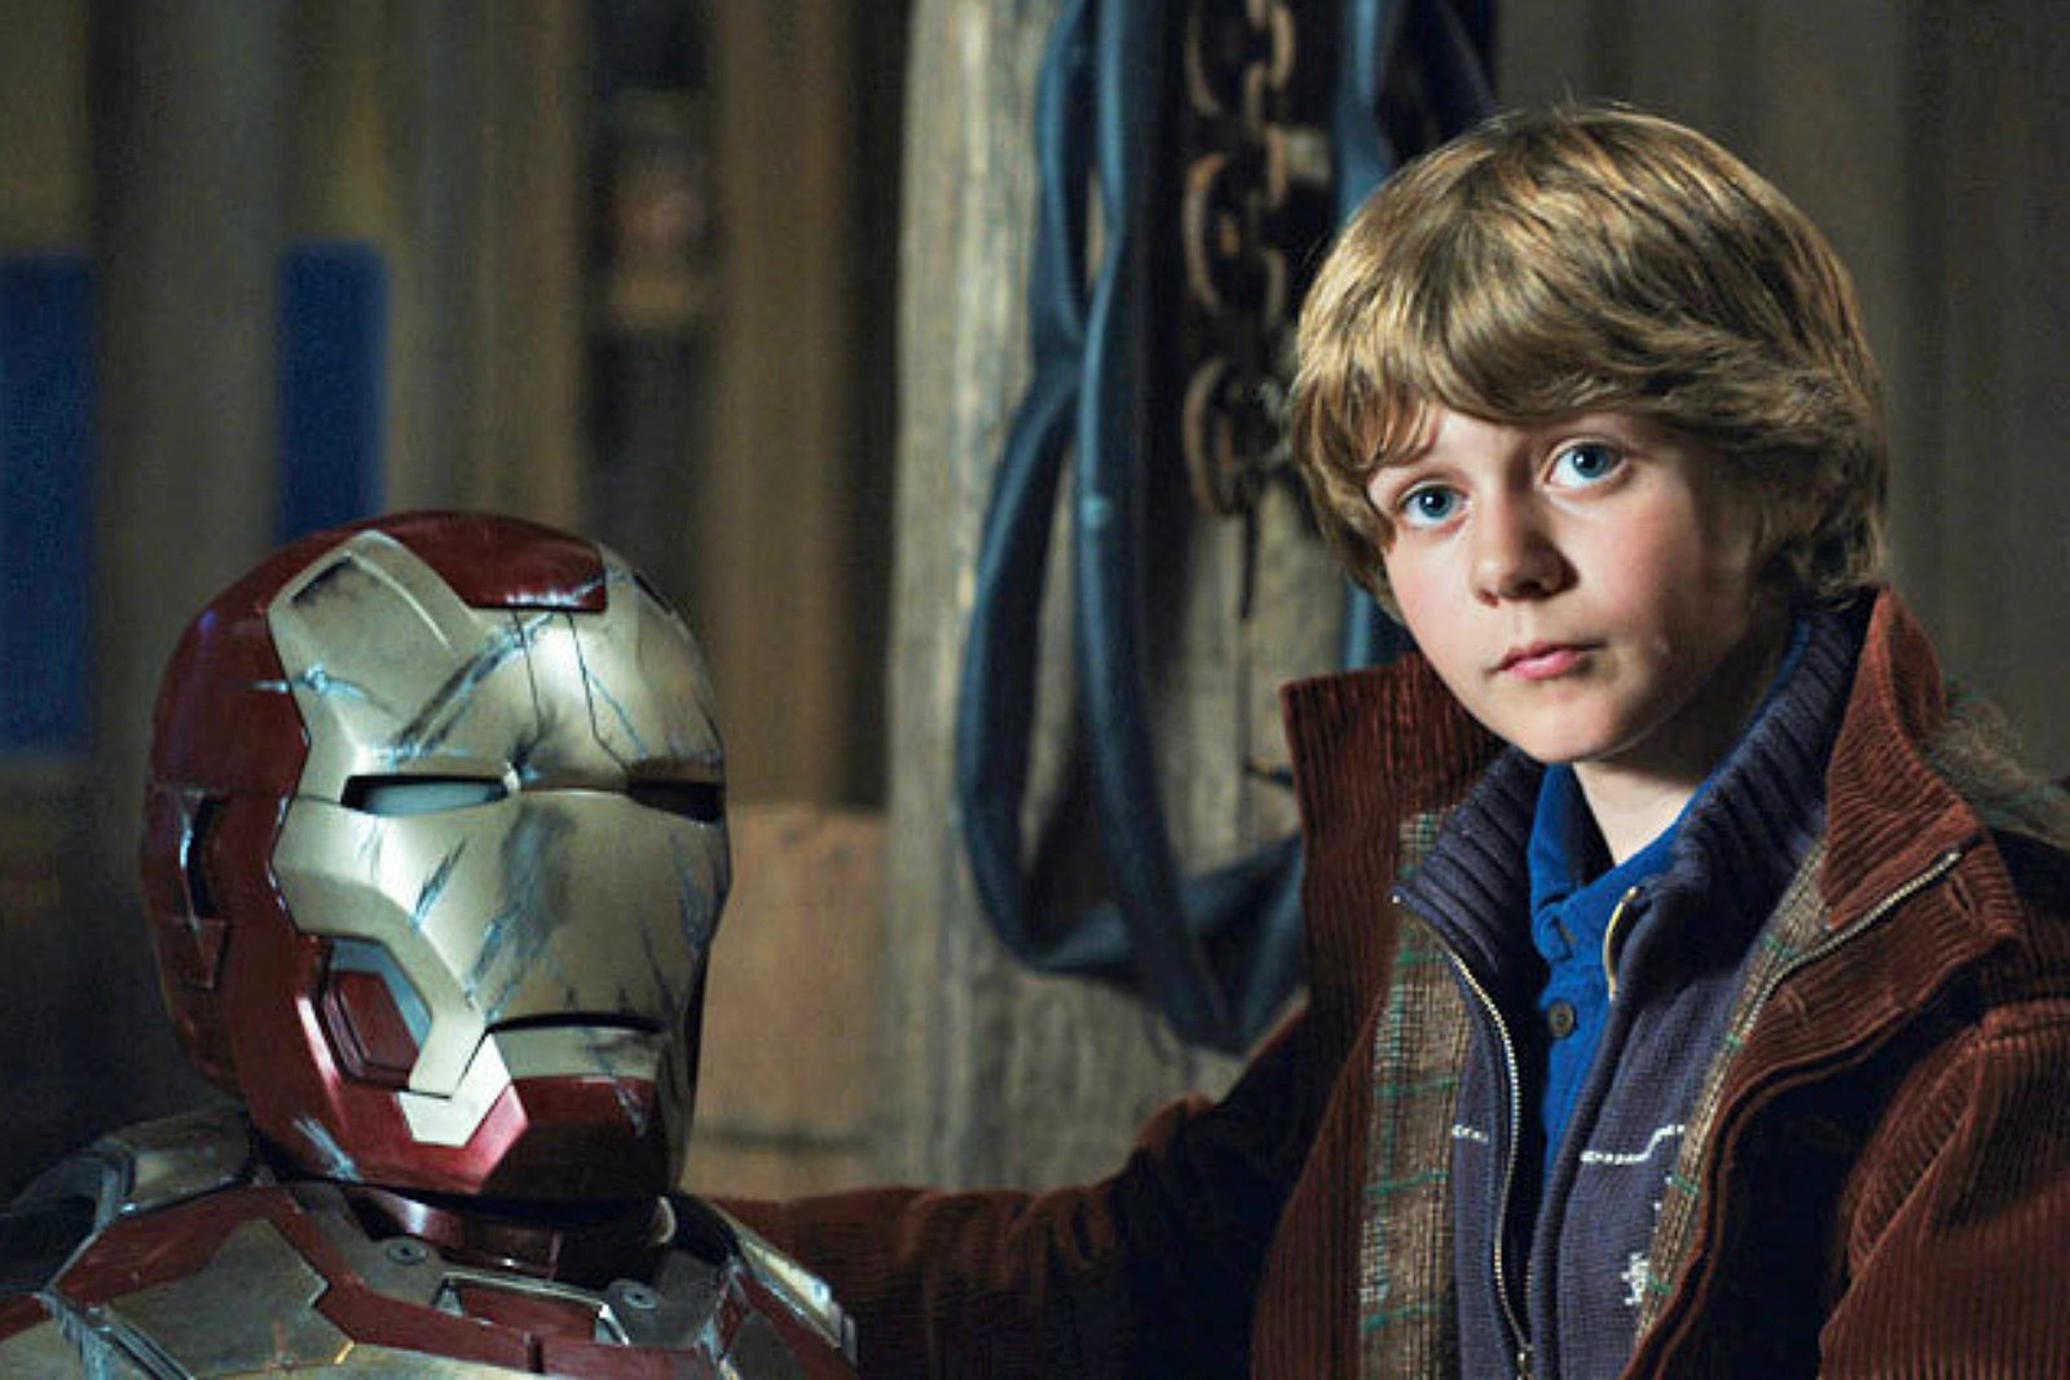 After Watching Avengers: Endgame This 6-Year-Old Iron Man Fan Cried Himself To Sleep